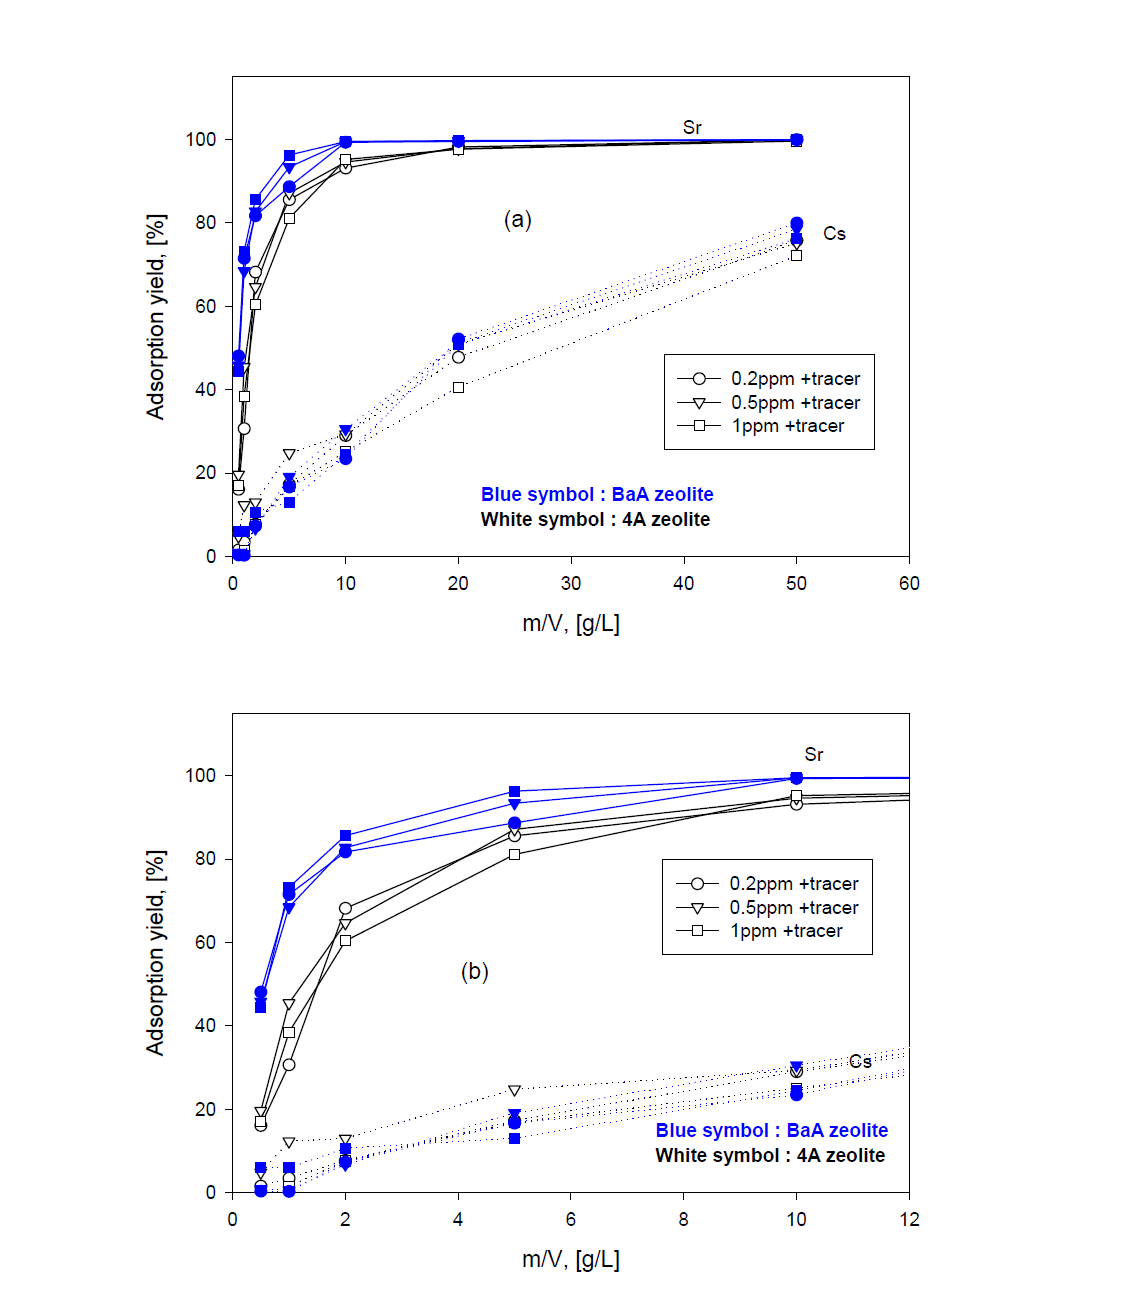 Adsorption yield of Sr and Cs by 4A zeolite and BaA zeolite with ratio of m/V.